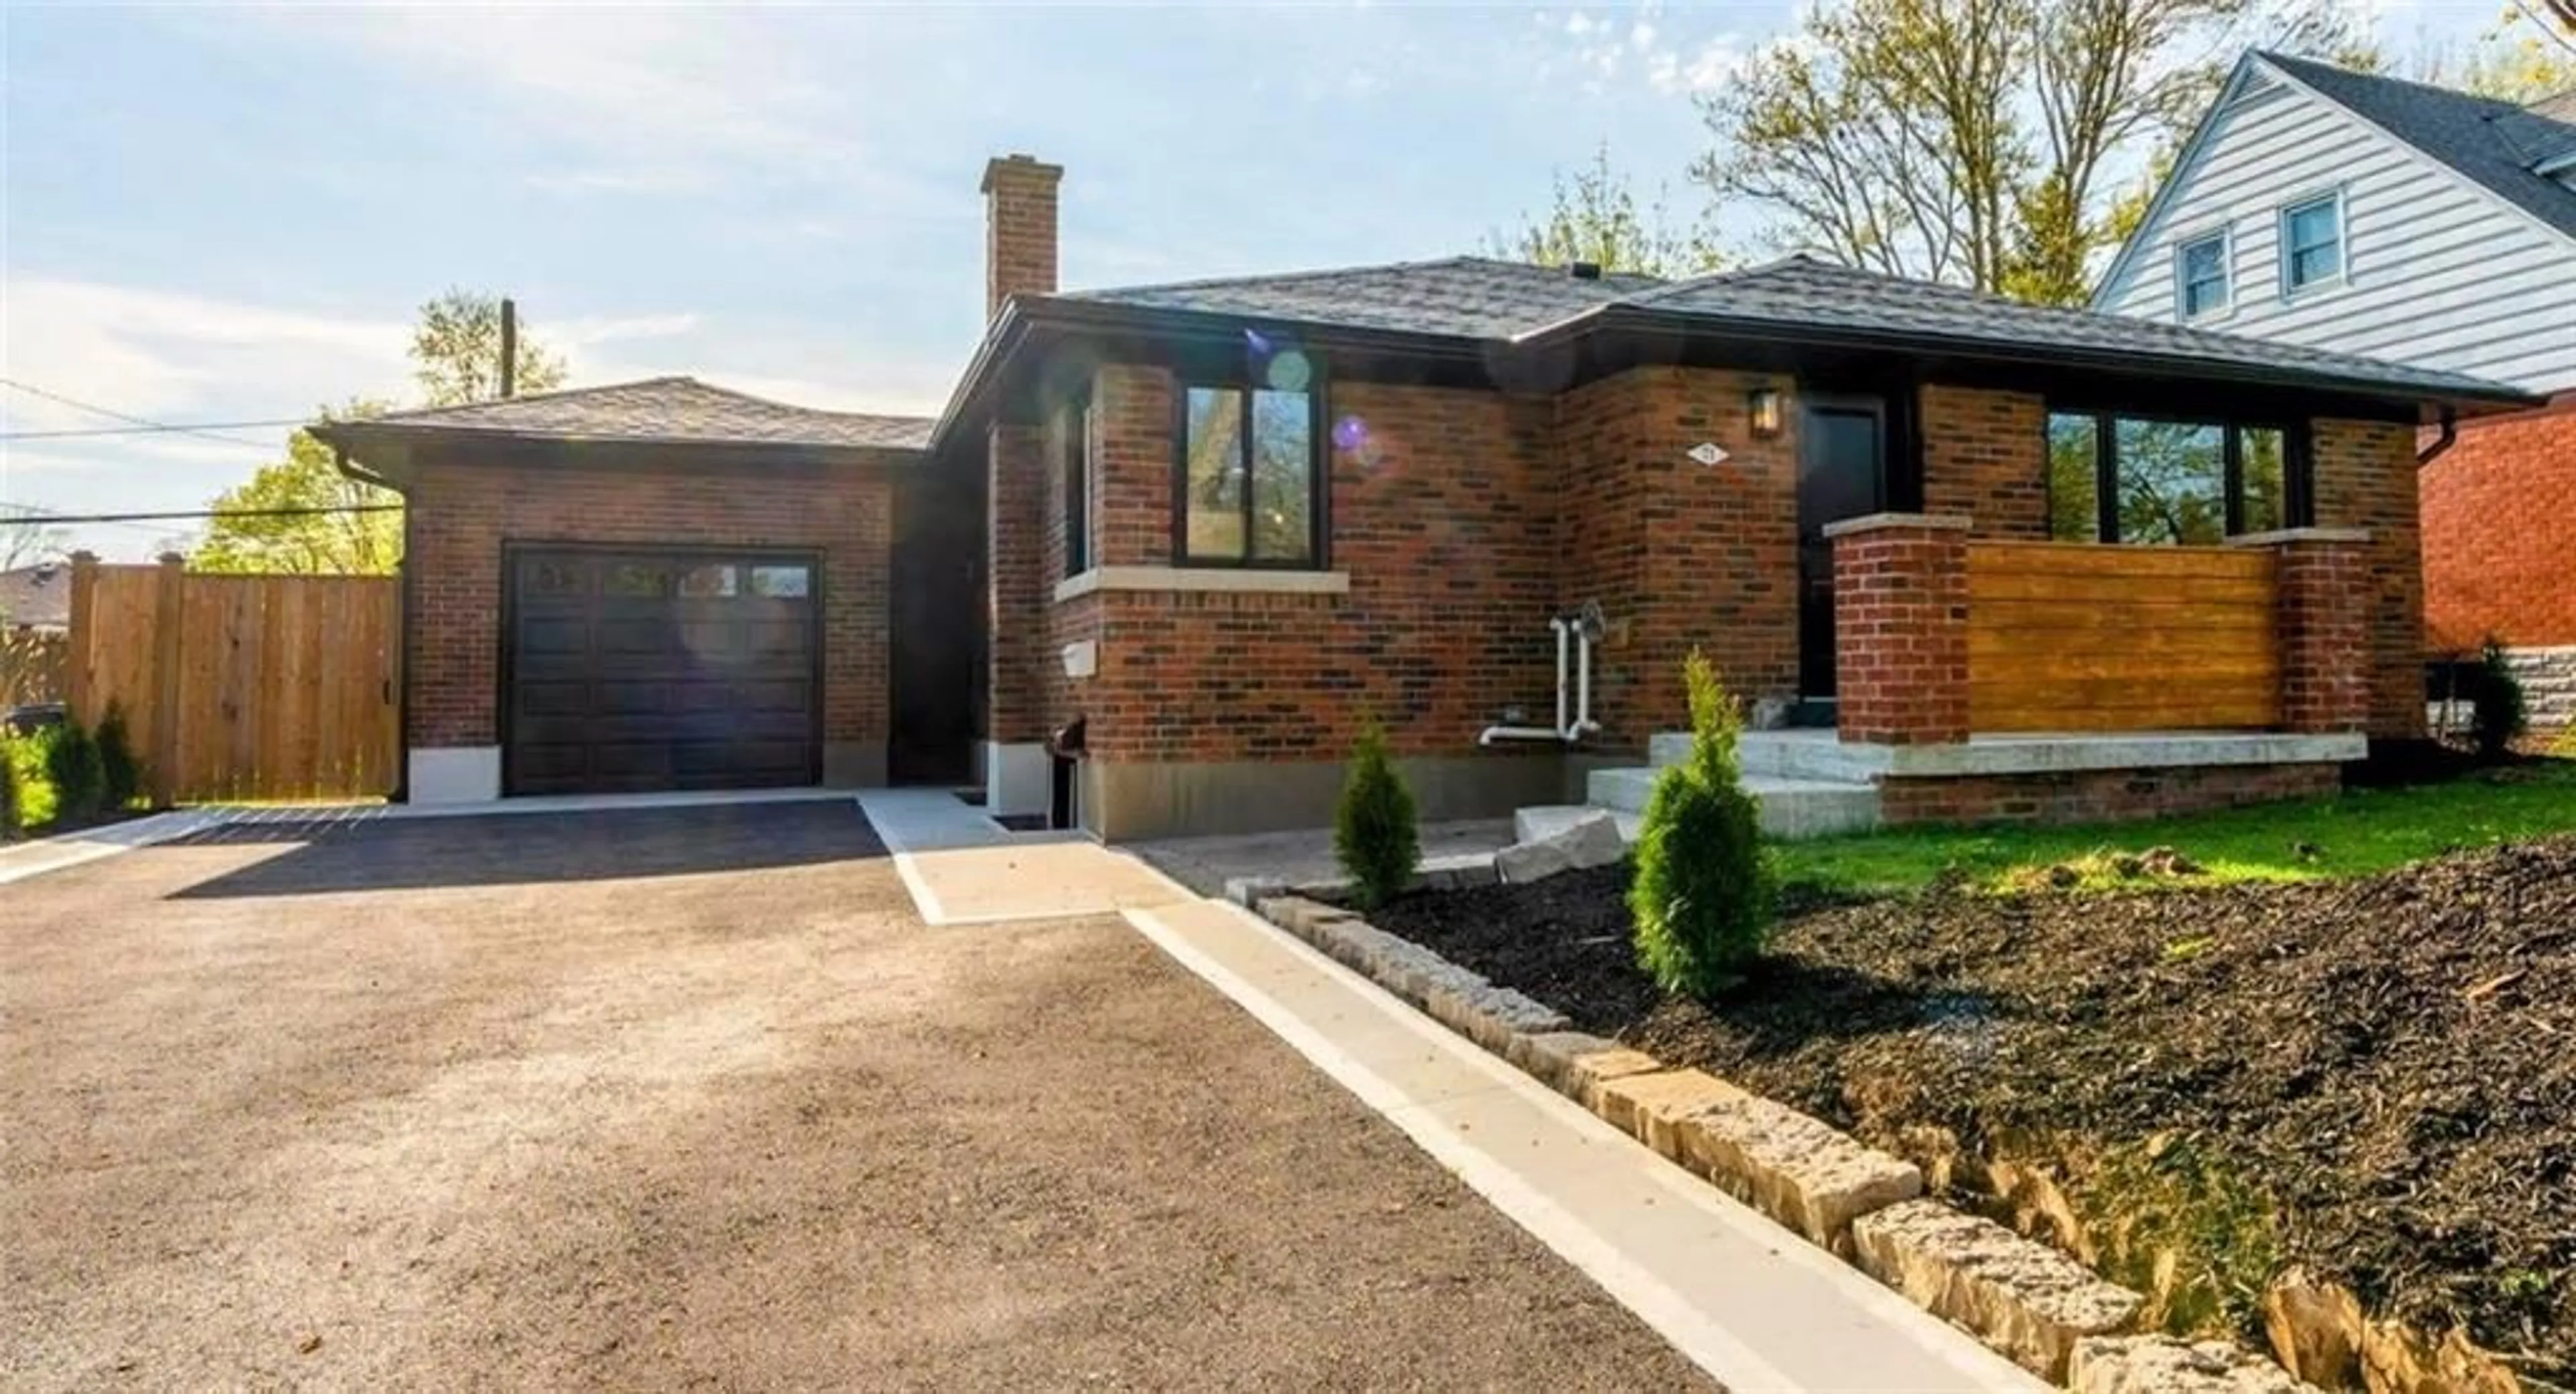 Home with brick exterior material for 71 DIFFIN Dr, Welland Ontario L3C 2K2